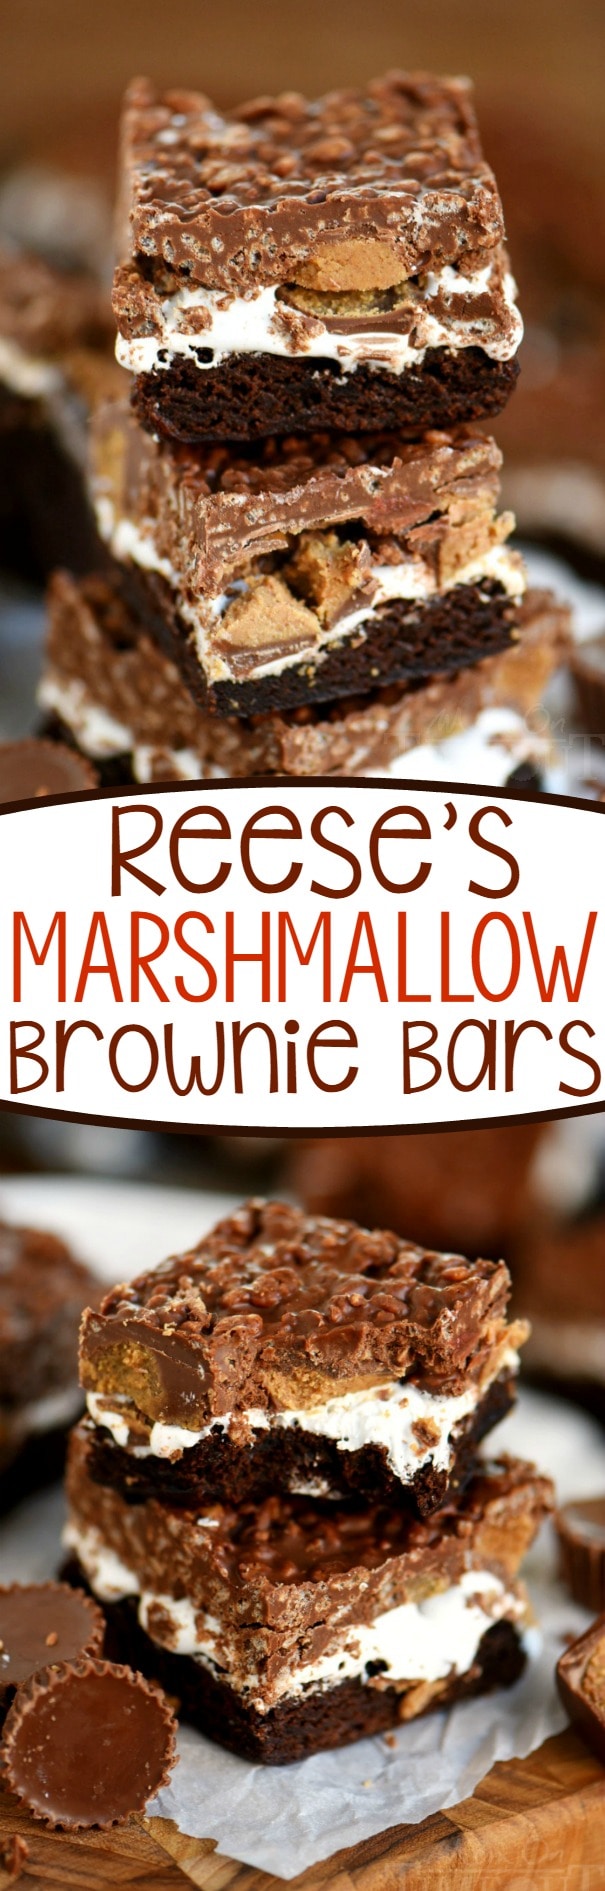 Reese's Marshmallow Brownie Bars are the perfect dessert for a crowd! This easy dessert recipe is impossible to resist - full of sweet chocolate and yummy peanut butter...all you'll need is a glass of milk!